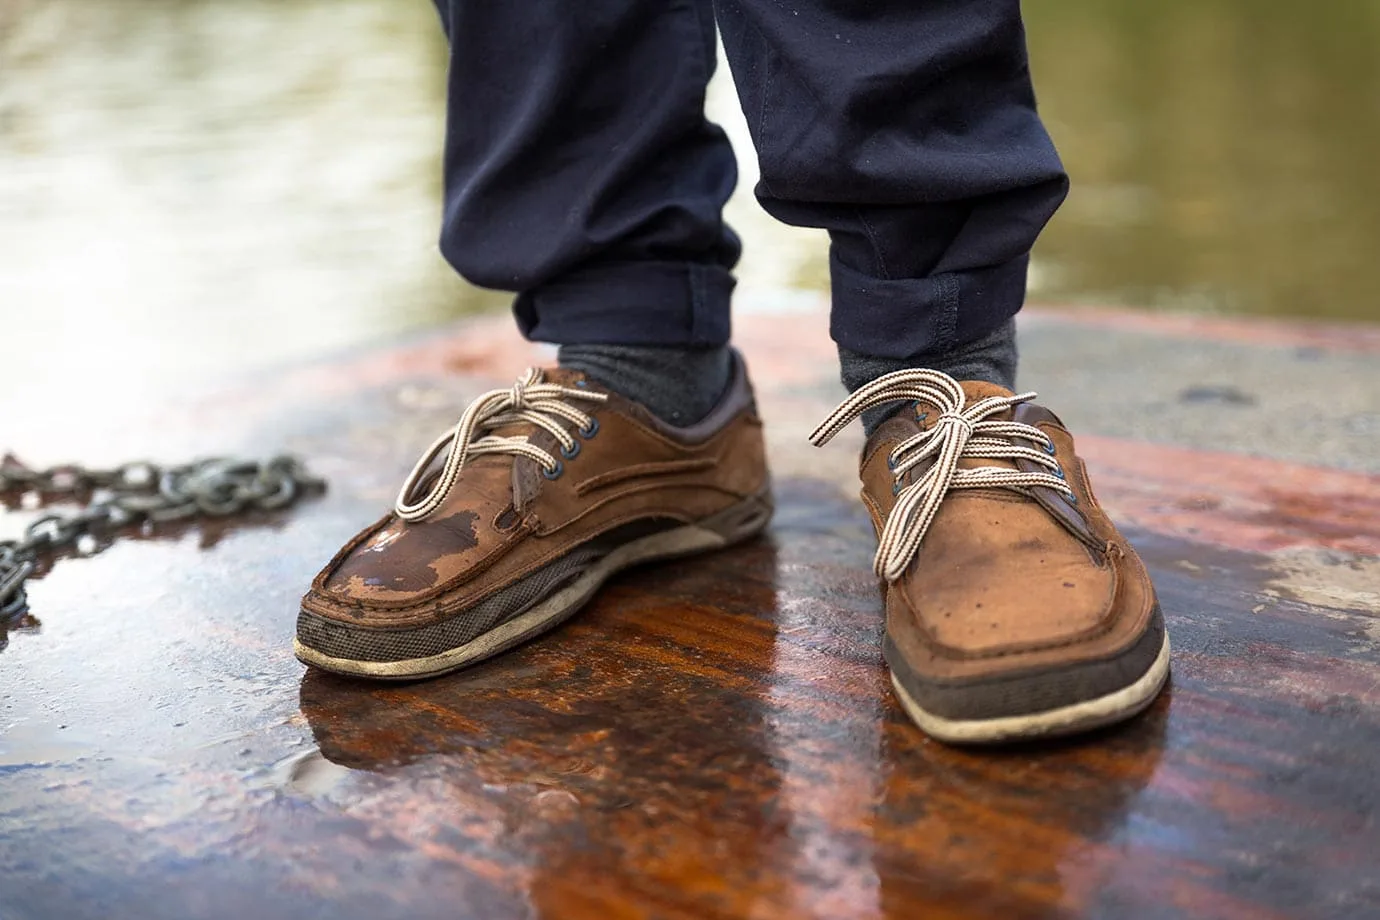 Punting boat shoes